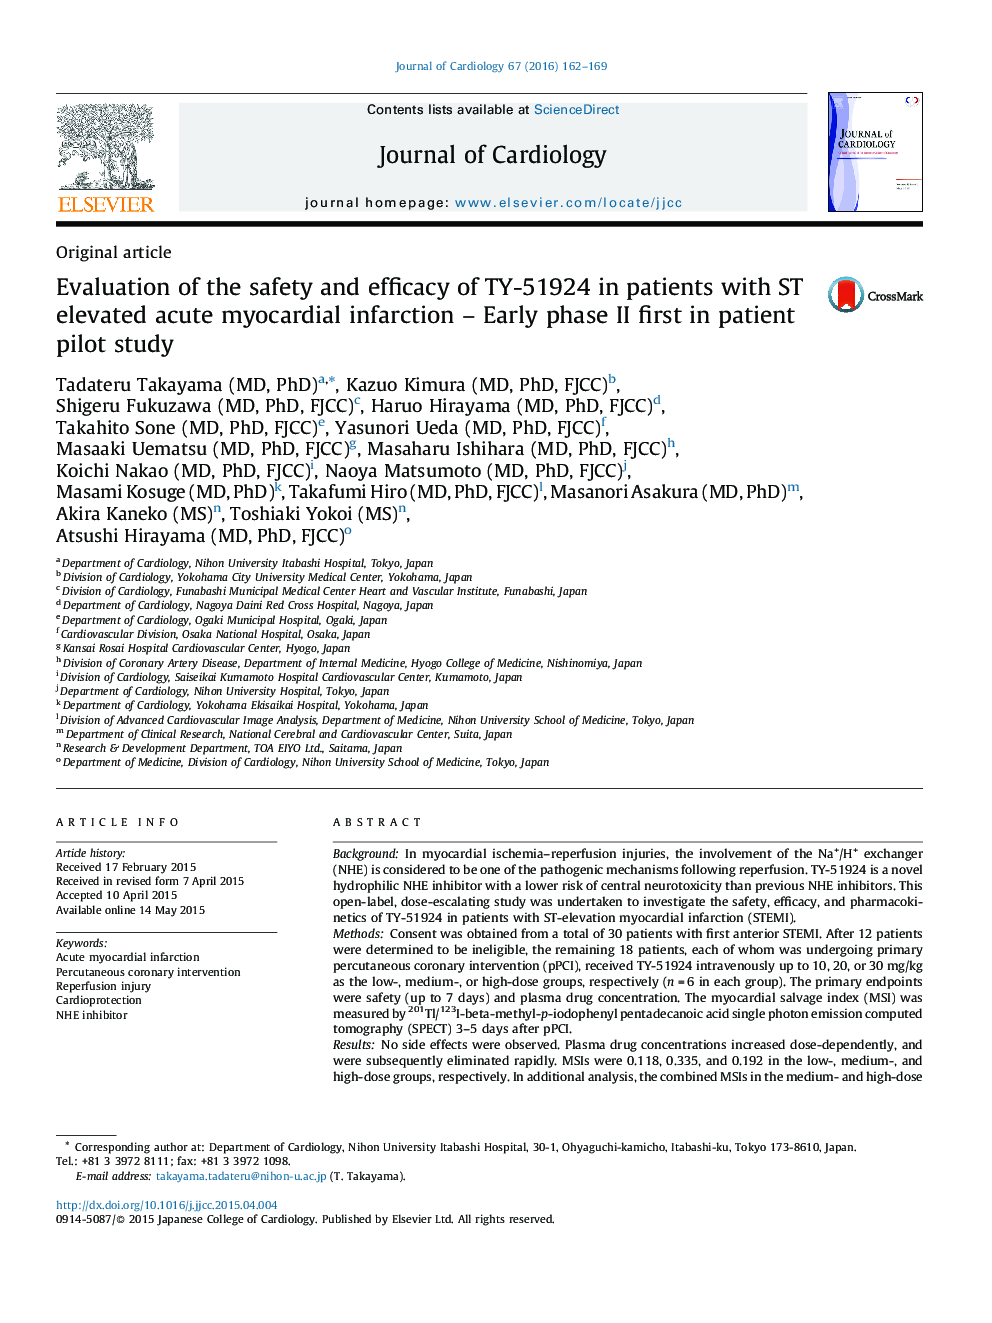 Evaluation of the safety and efficacy of TY-51924 in patients with ST elevated acute myocardial infarction – Early phase II first in patient pilot study